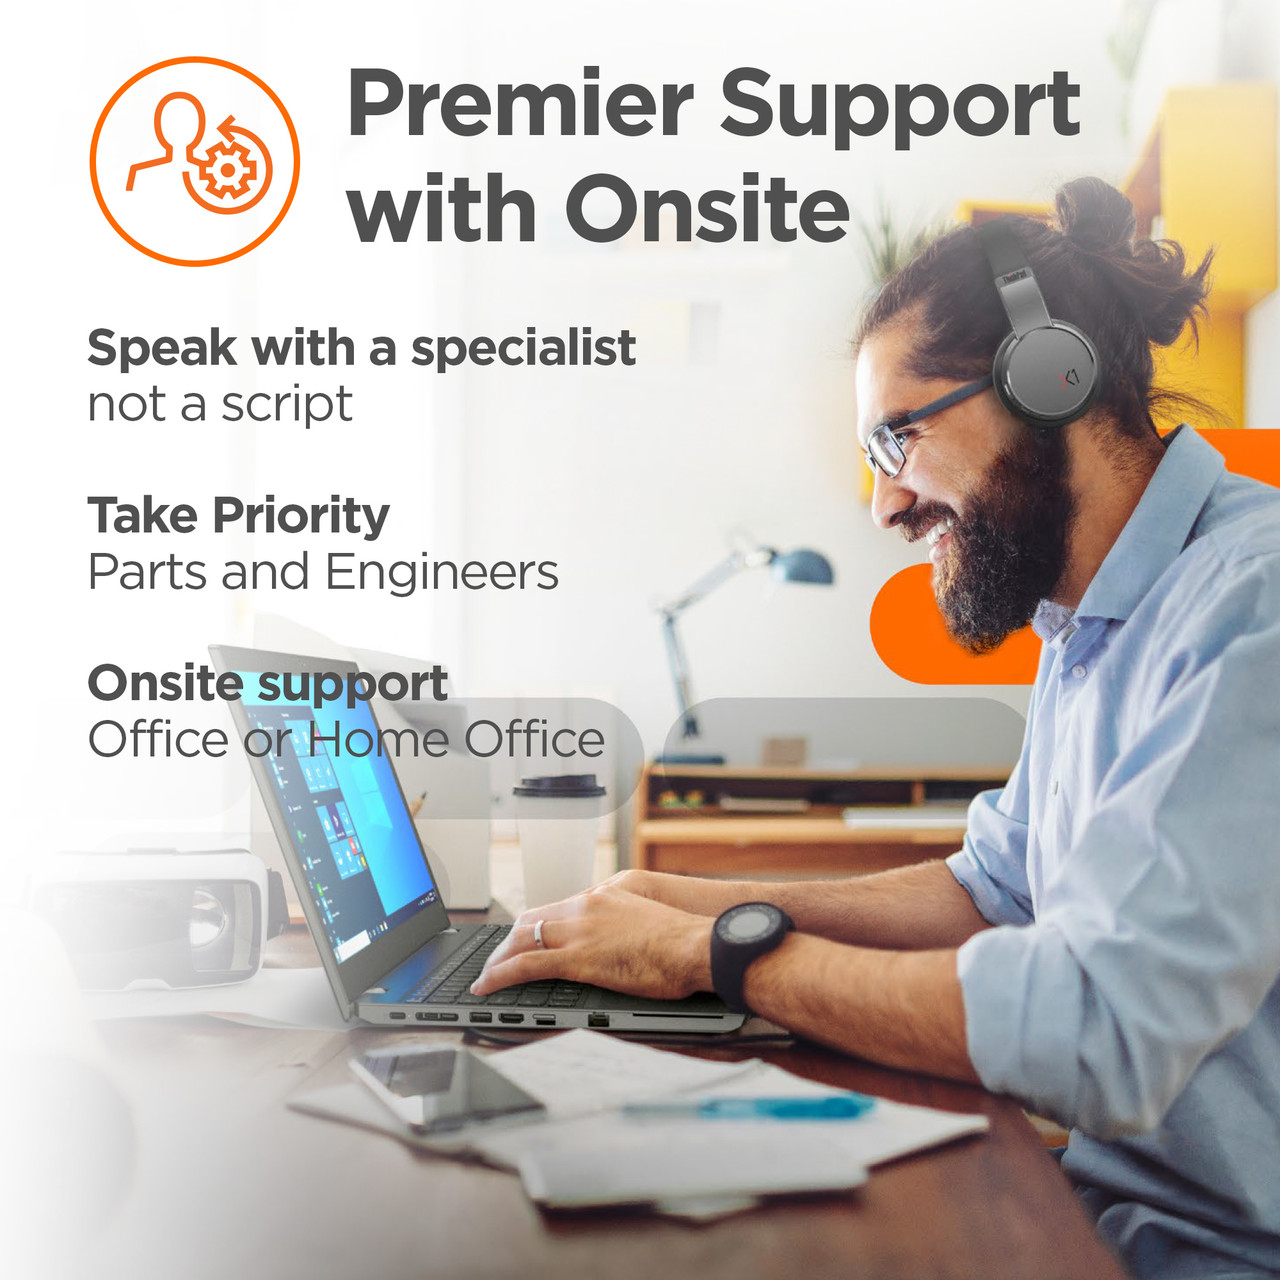 Lenovo 5 Year Premier Support With Onsite